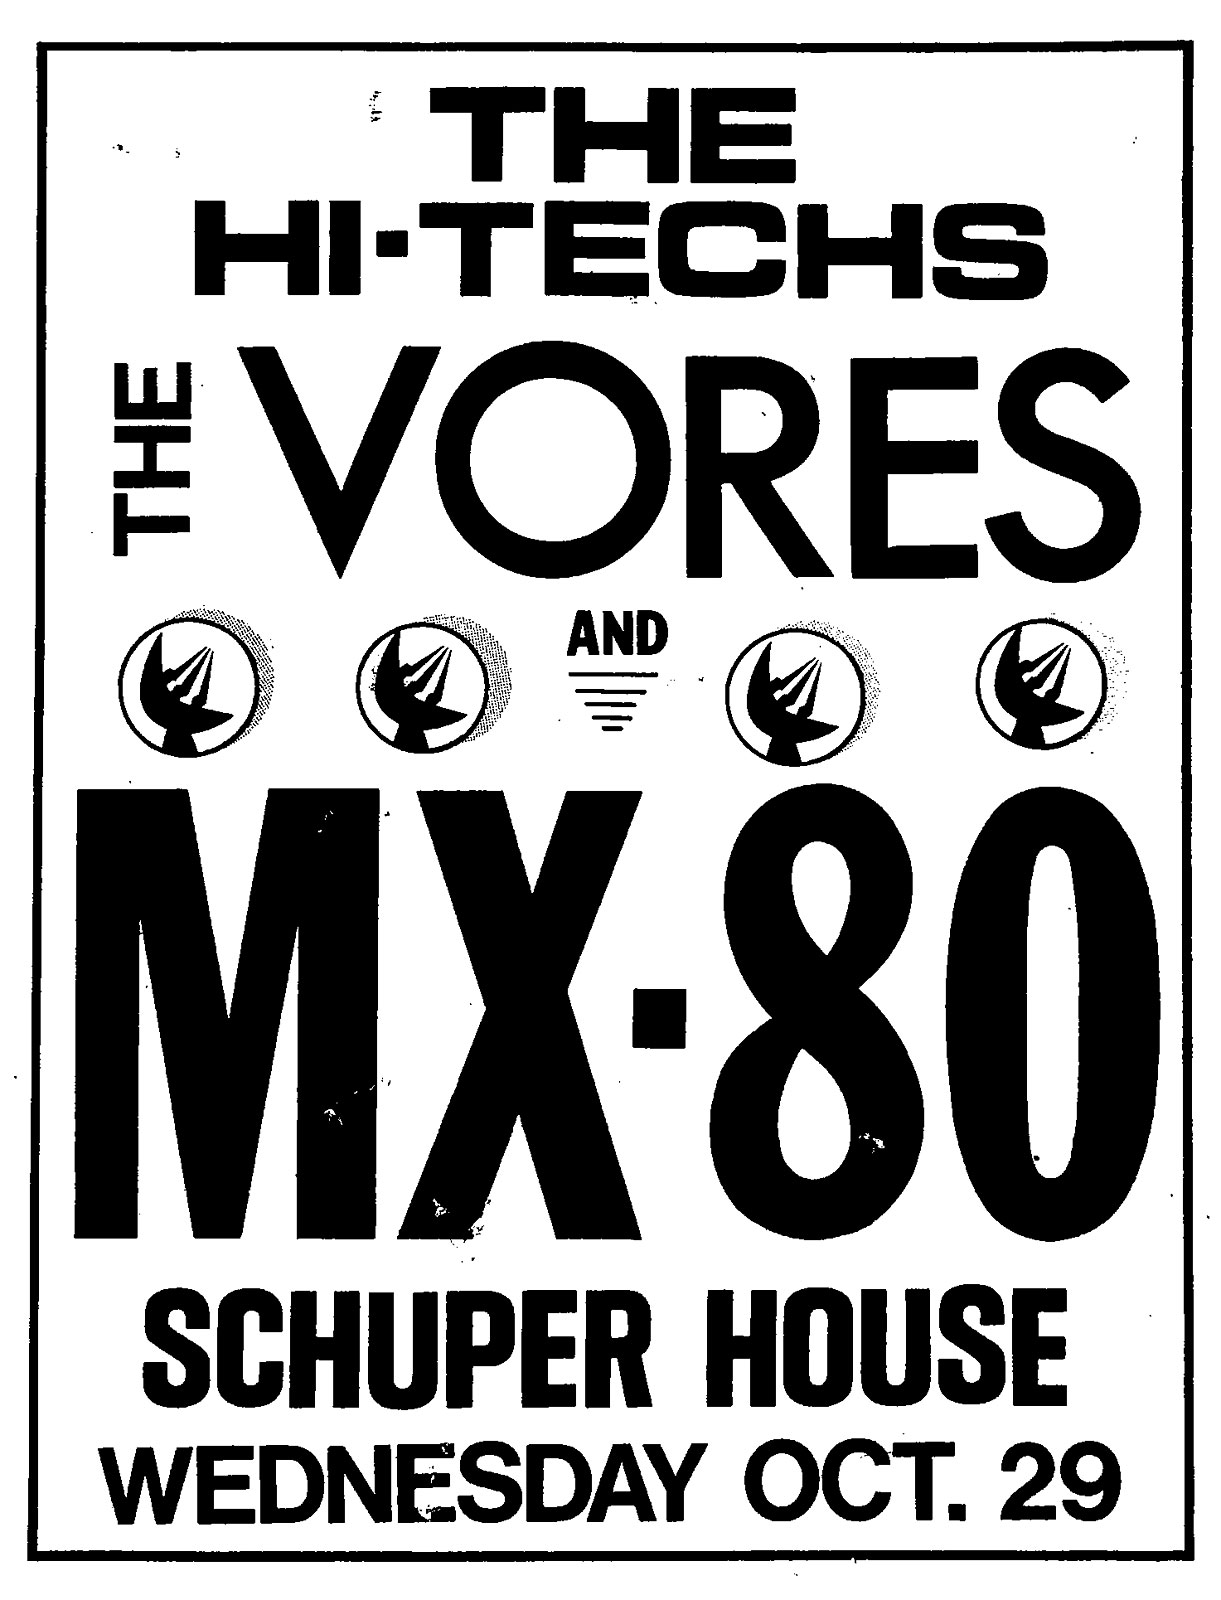 Poster for Hi-Techs, The Vores and MX-80 Sound at Schuper House in Buffalo, New York 10.29.1980